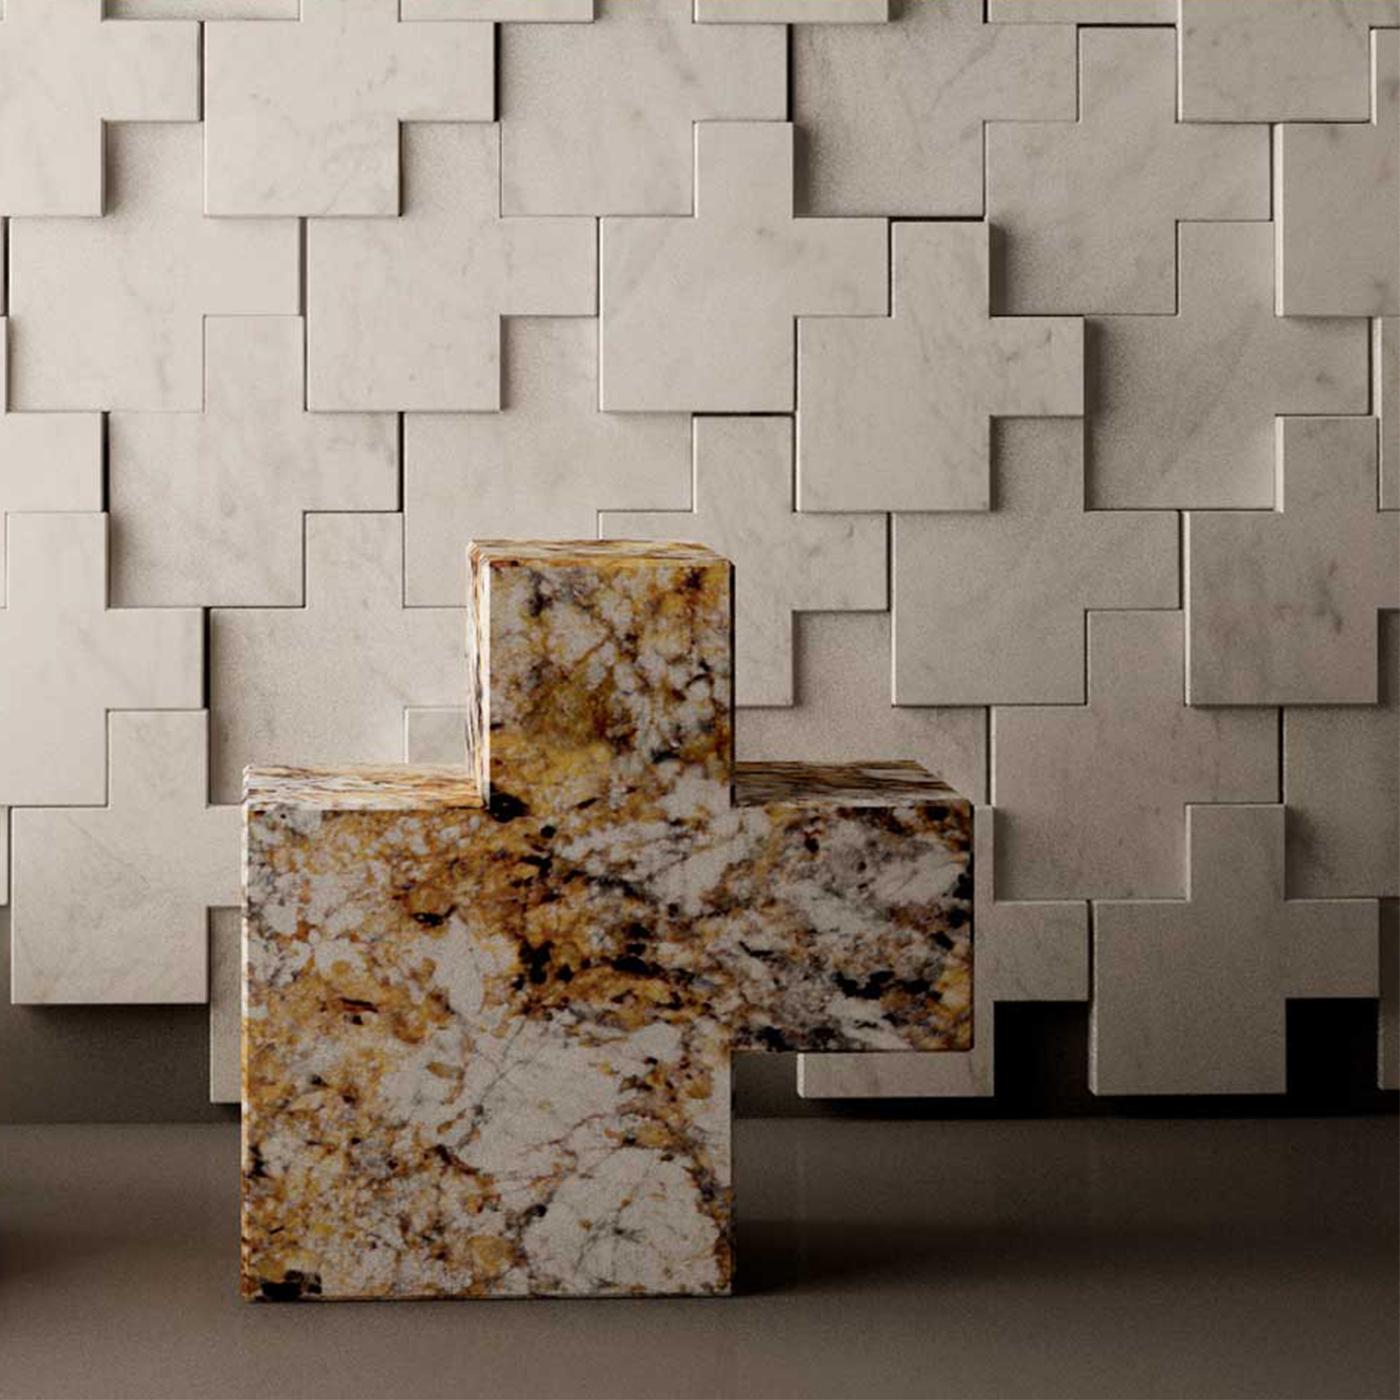 Diverse functionality converges with a clean, contemporary aesthetic in this high-strength geometric structure designed by Studio Formart. Sculpted from rare Paonazzo marble from Carrara, these minimalist pieces are a complement suitable for both